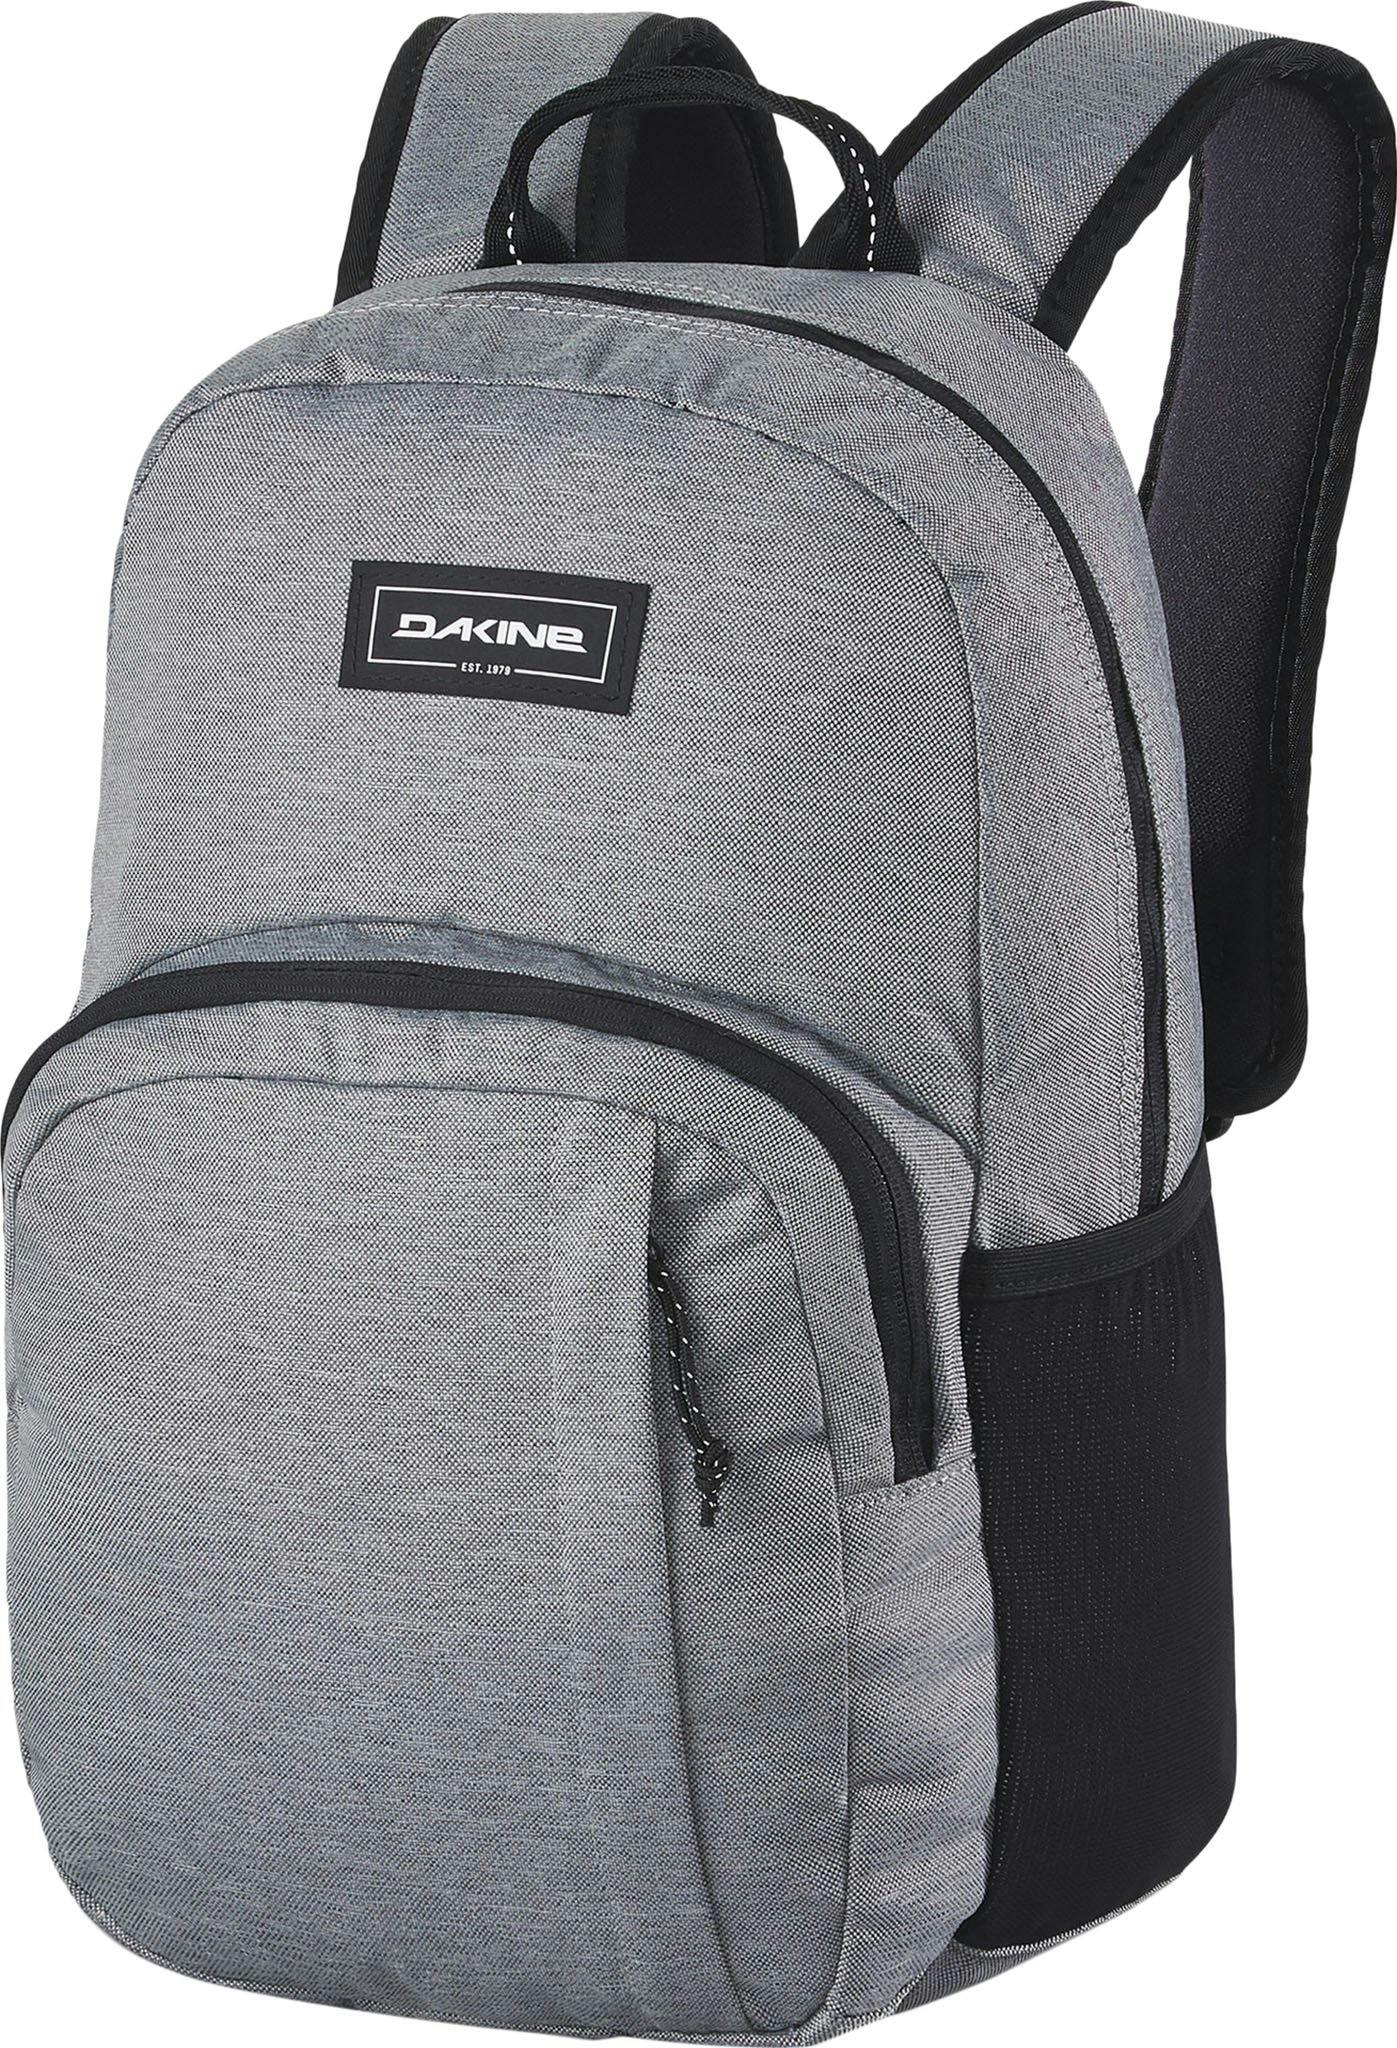 Product image for Campus Backpack 18L - Kids